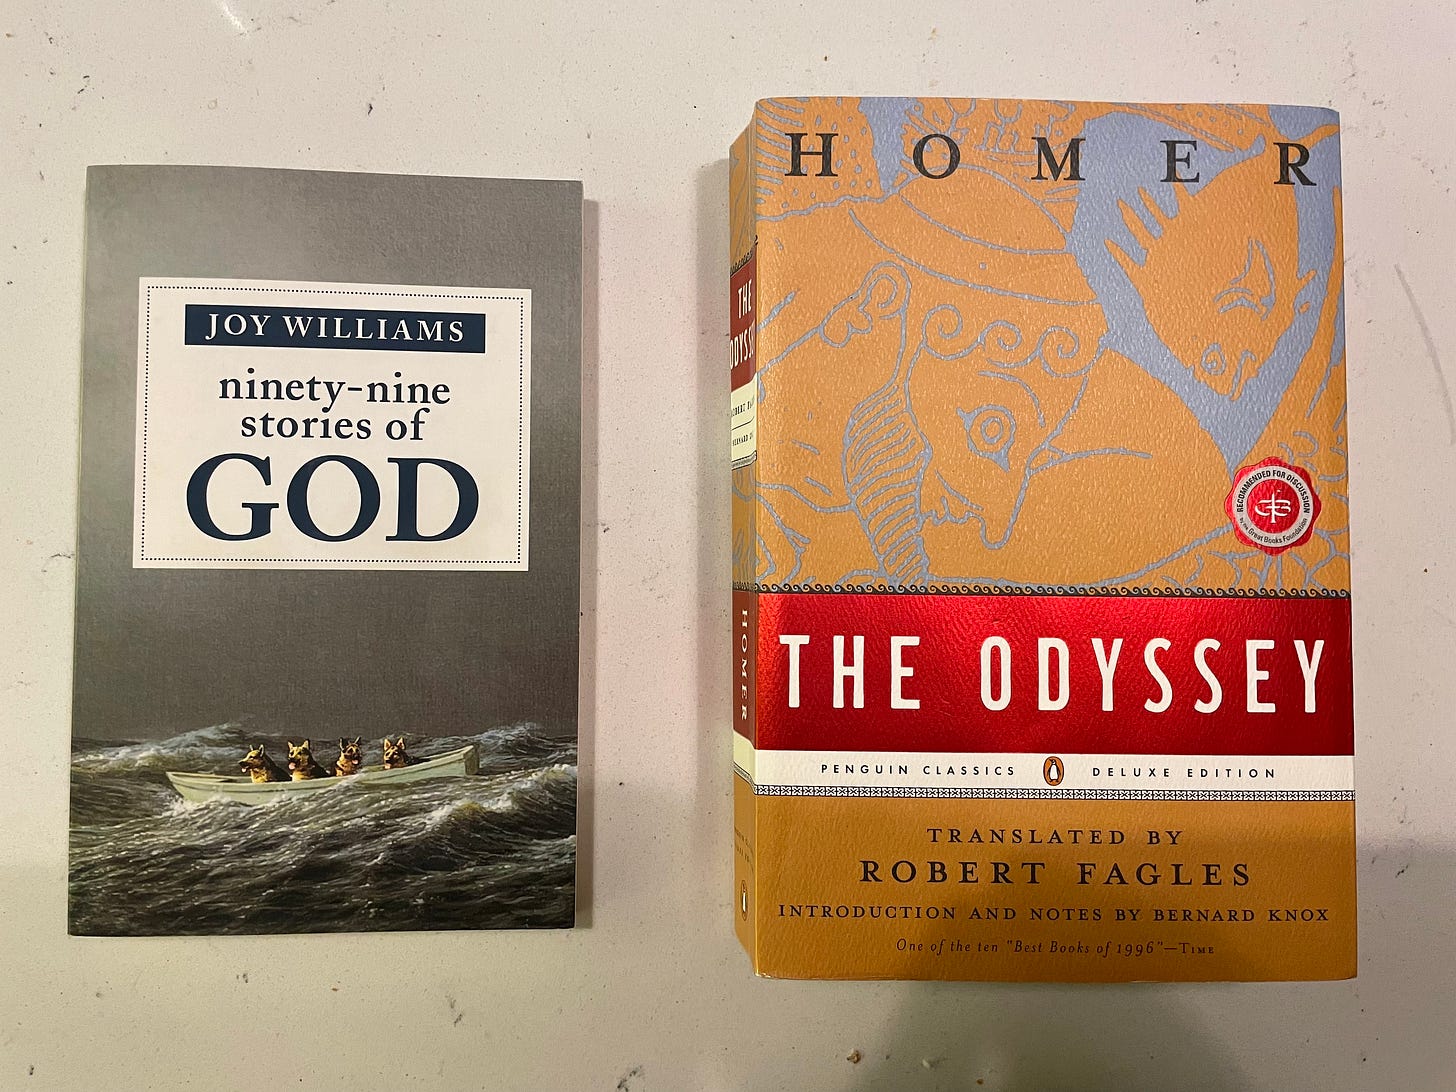 99 Stories of God by Joy Williams and The Odyssey by Homer translated by Robert Fagles